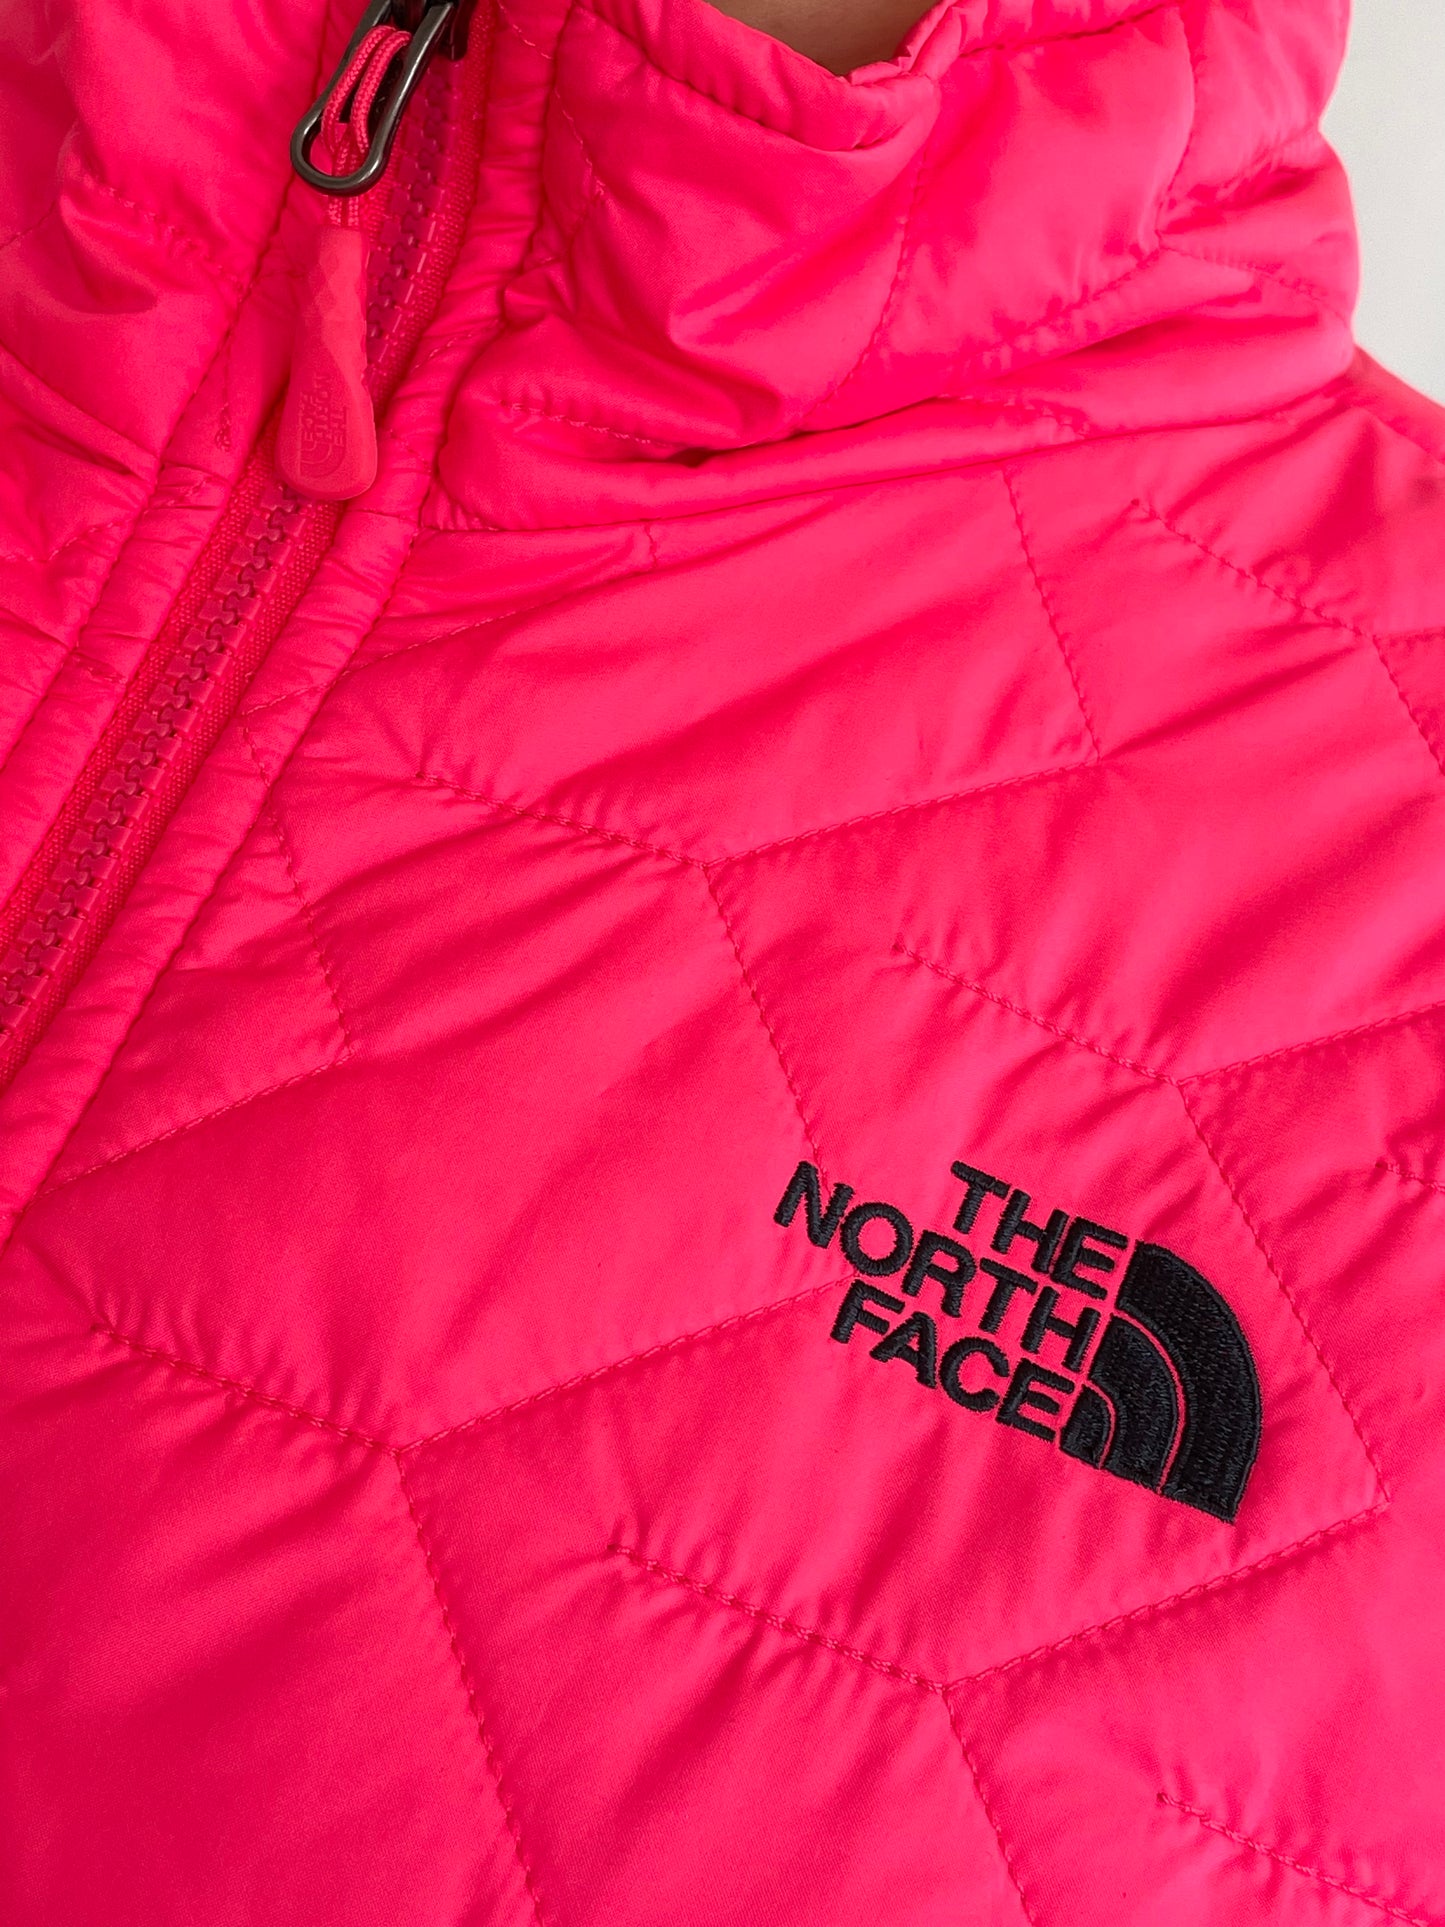 The North Face Women’s Tamburello Quilted Ski Jacket Pink